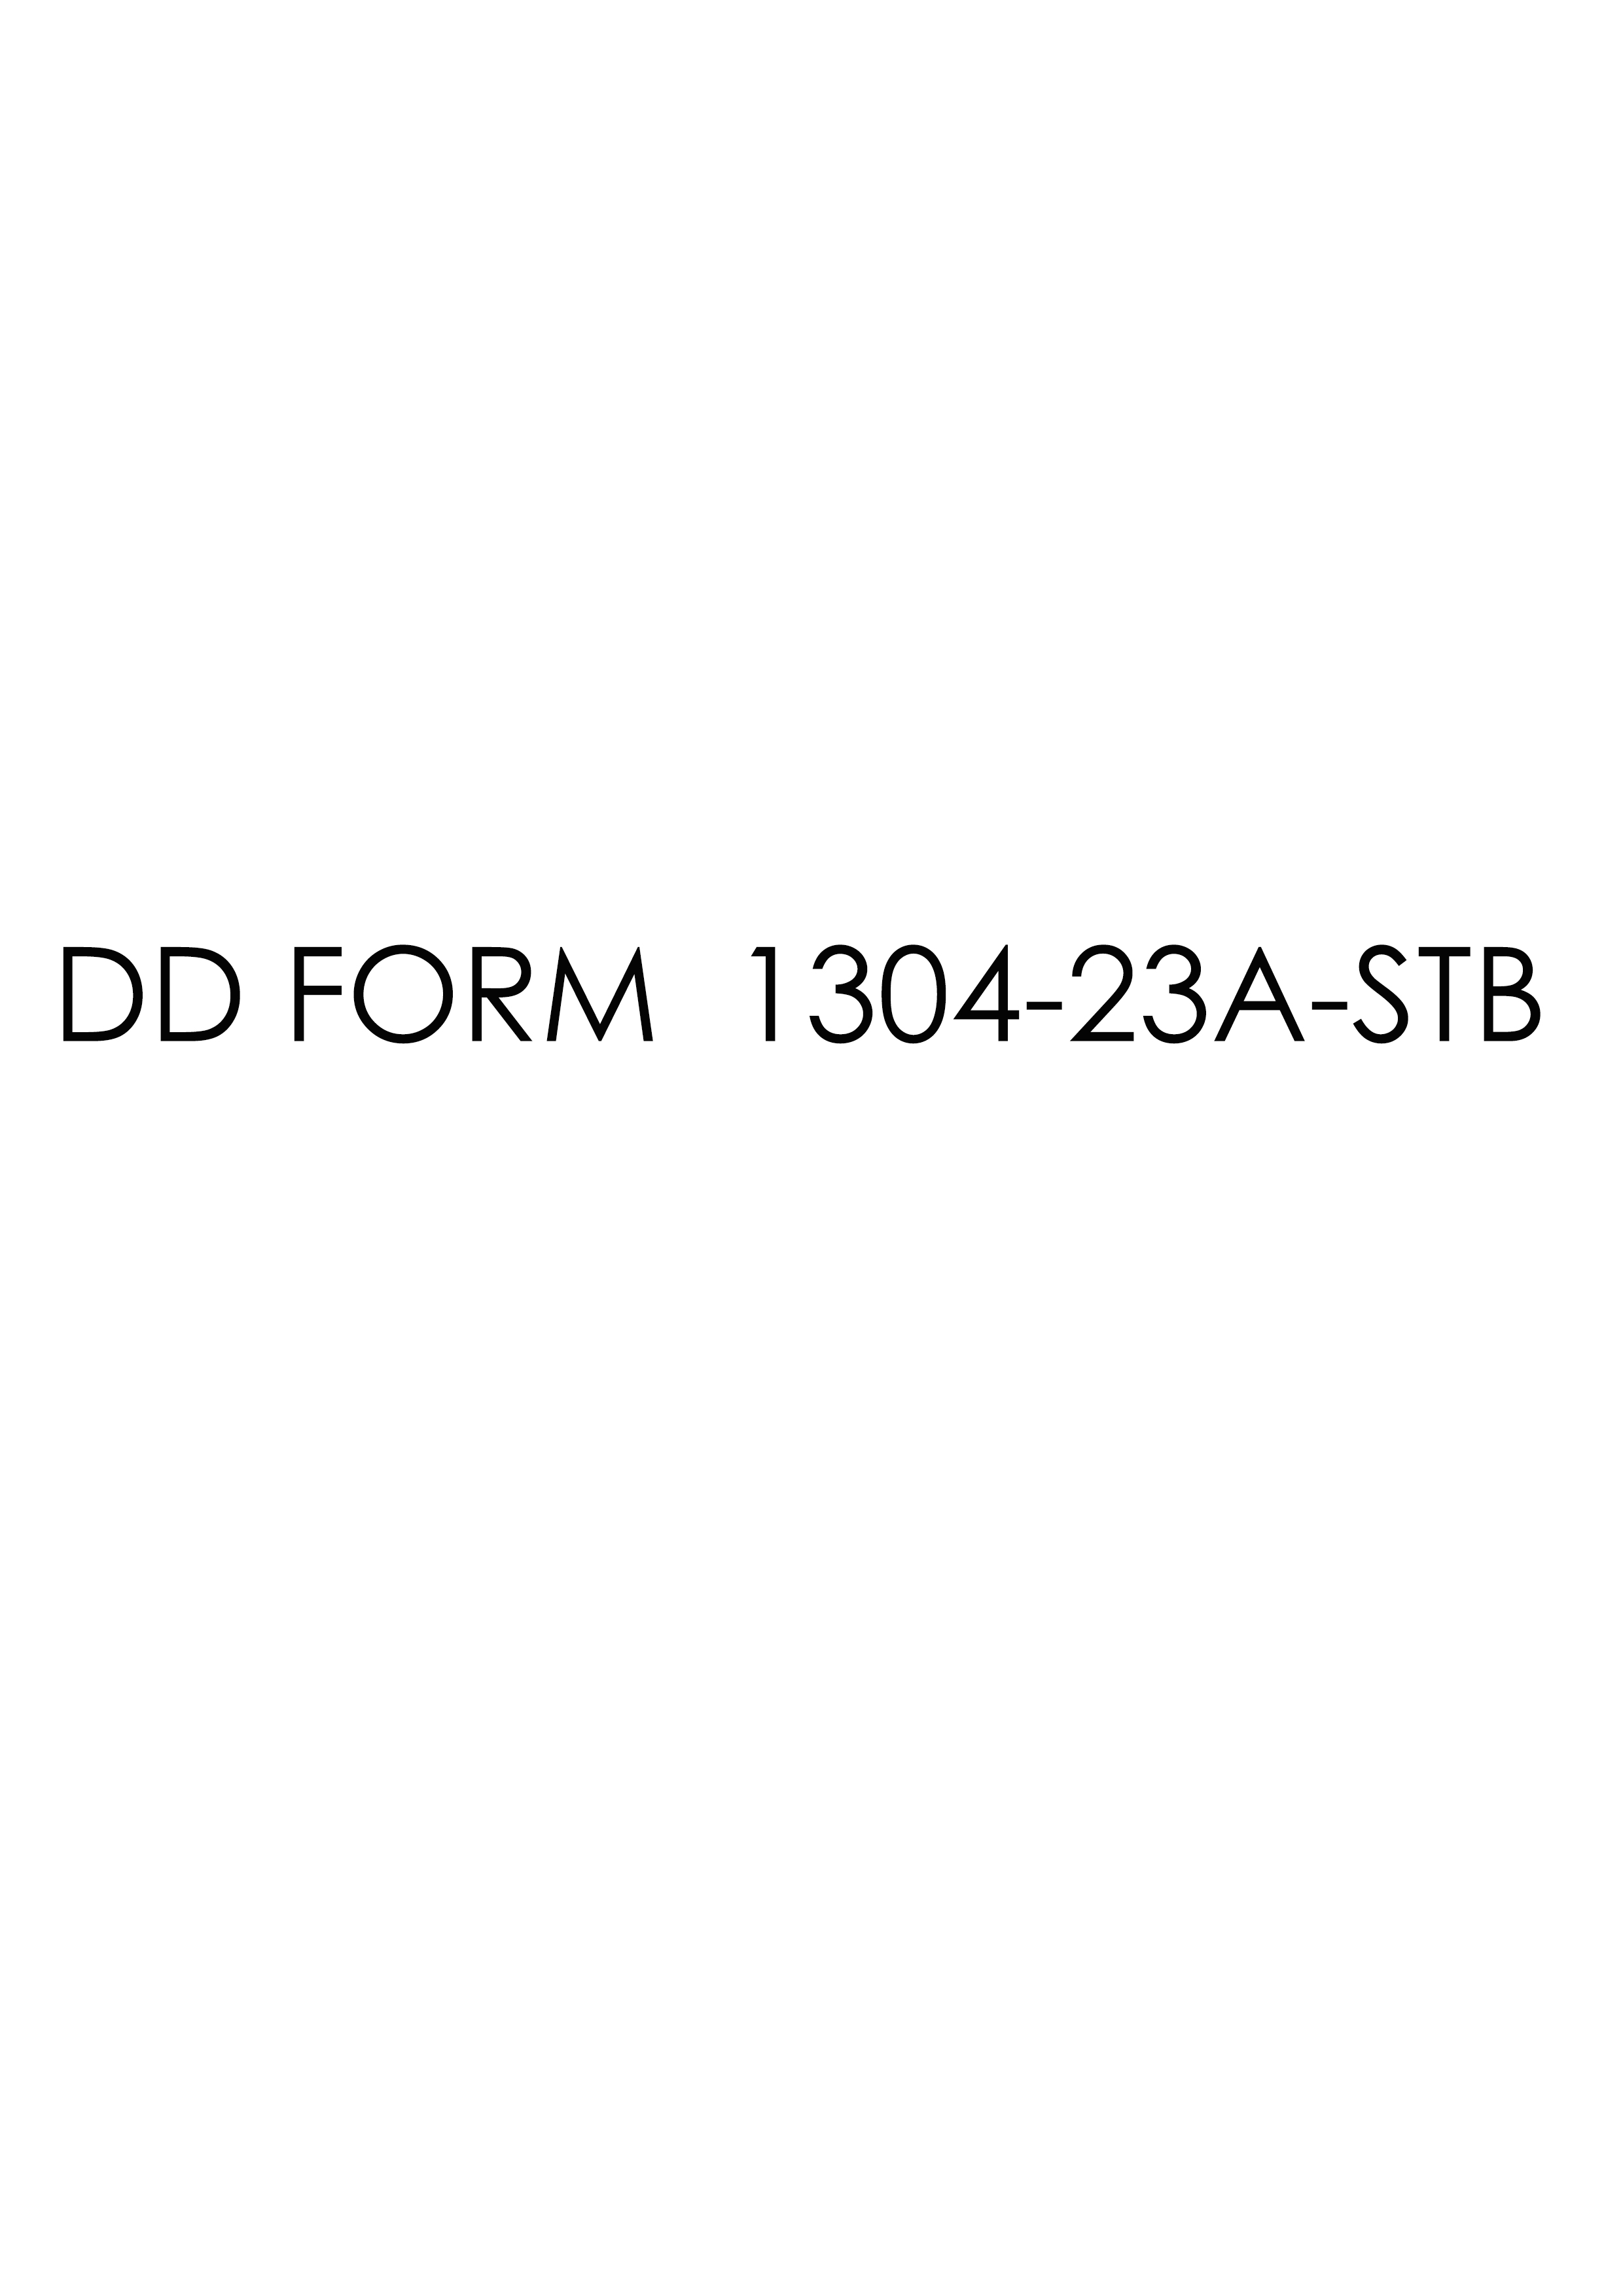 dd Form 1304-23A-STB fillable